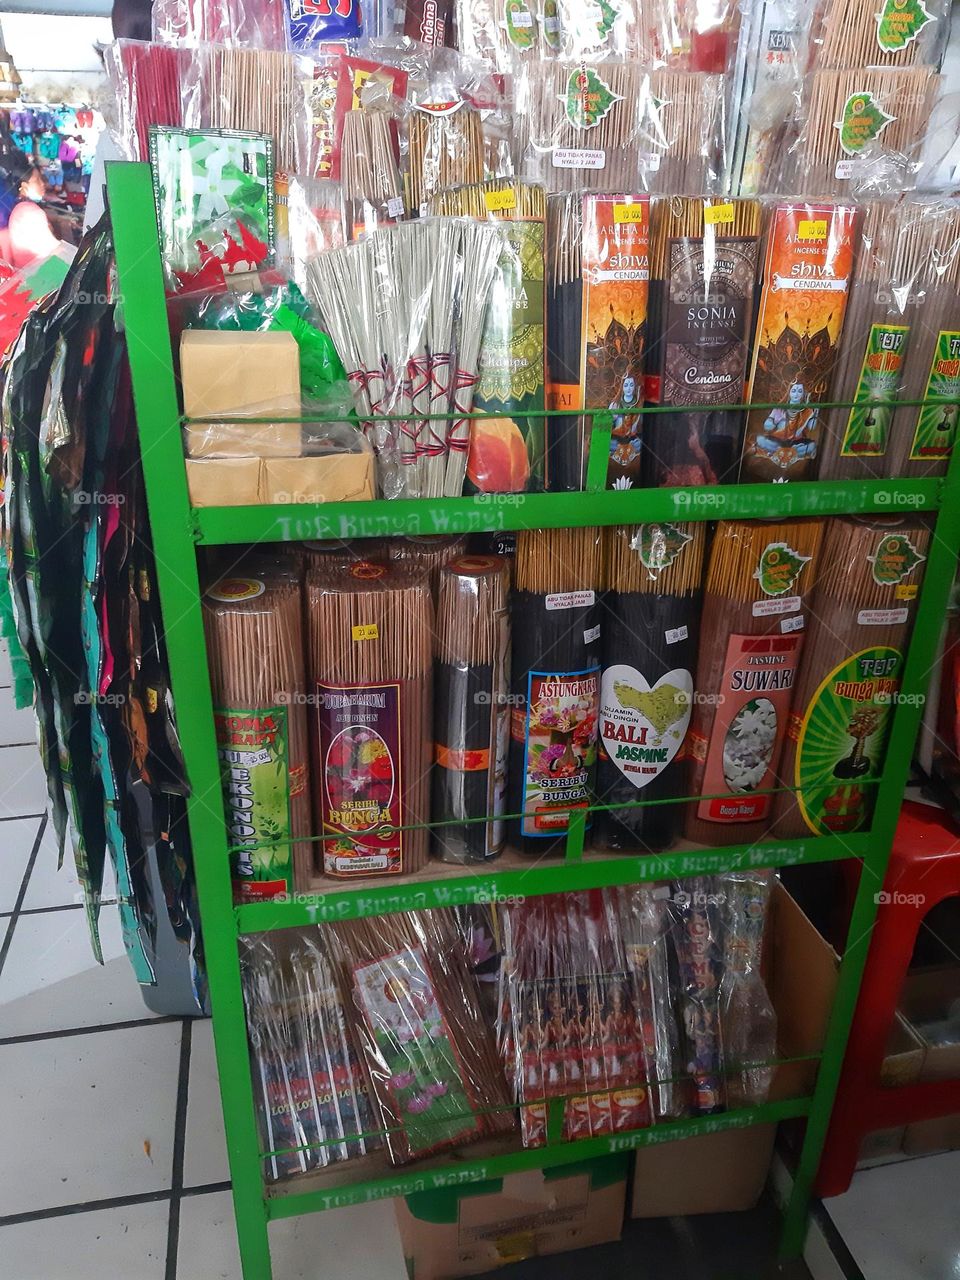 The balinese lightsticks that needed for evwry cetemony are displayed on the green plastic rack